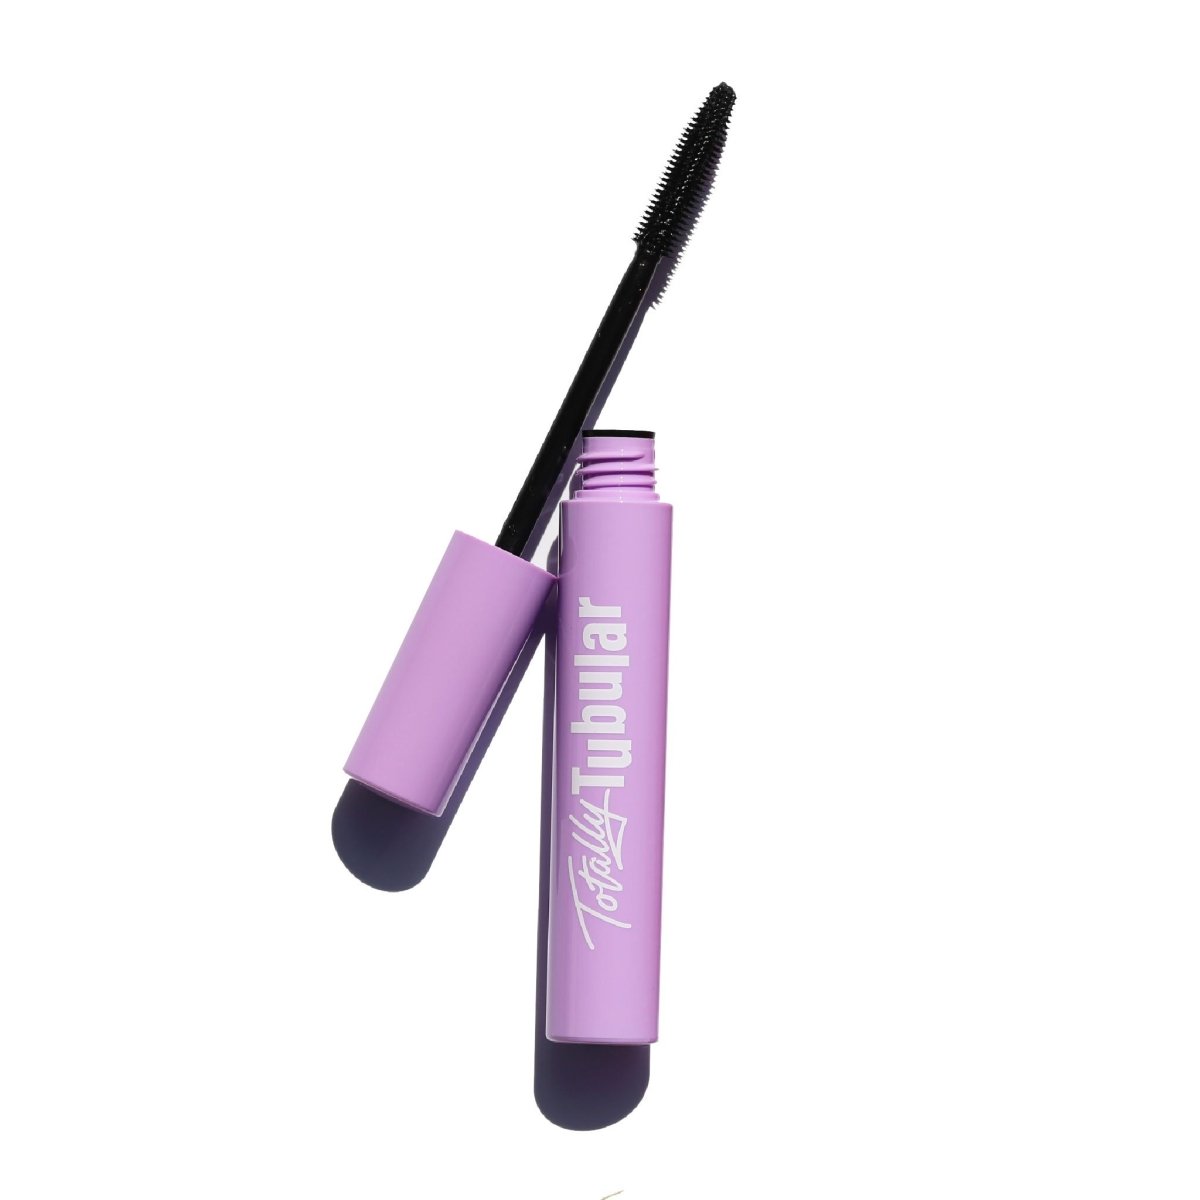 open purple mascara tube with black cone shaped applicator - totally tubular mascara, the heights - half caked makeup